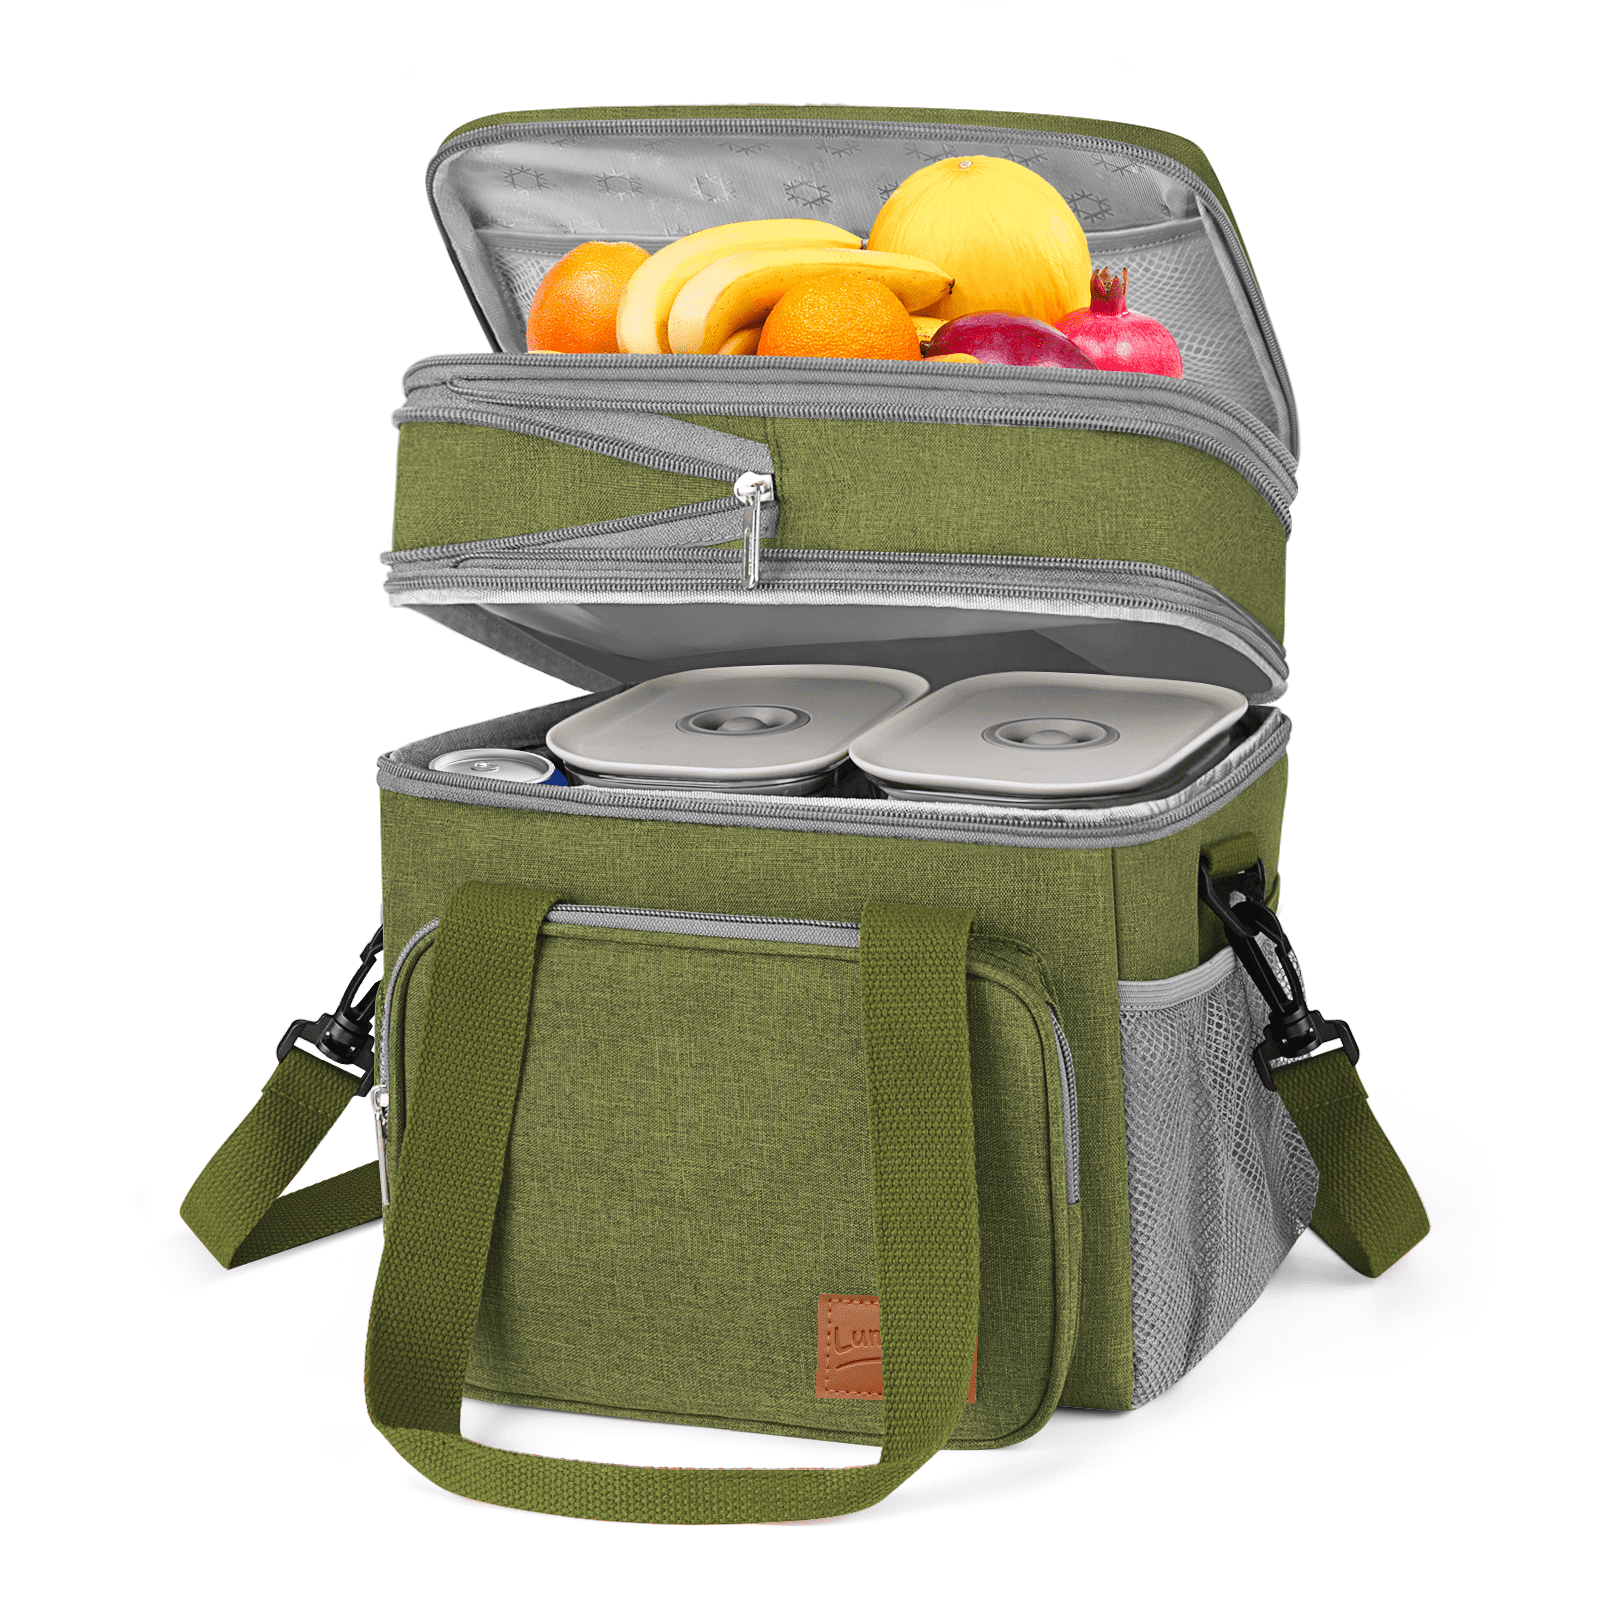  Lunch Bag Women, Insulated Leakproof Cooler Adult Lunch Box,  Large Lunch Tote for Work with Adjustable Shoulder Straps & Side Pockets  Cute Lunch Bag for Picnic, college, Hiking, Beach Lunch Bag (